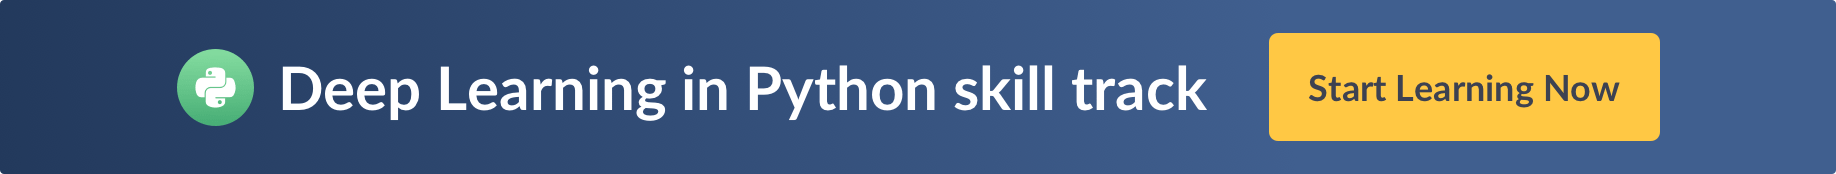 deep learning in python skill track banner